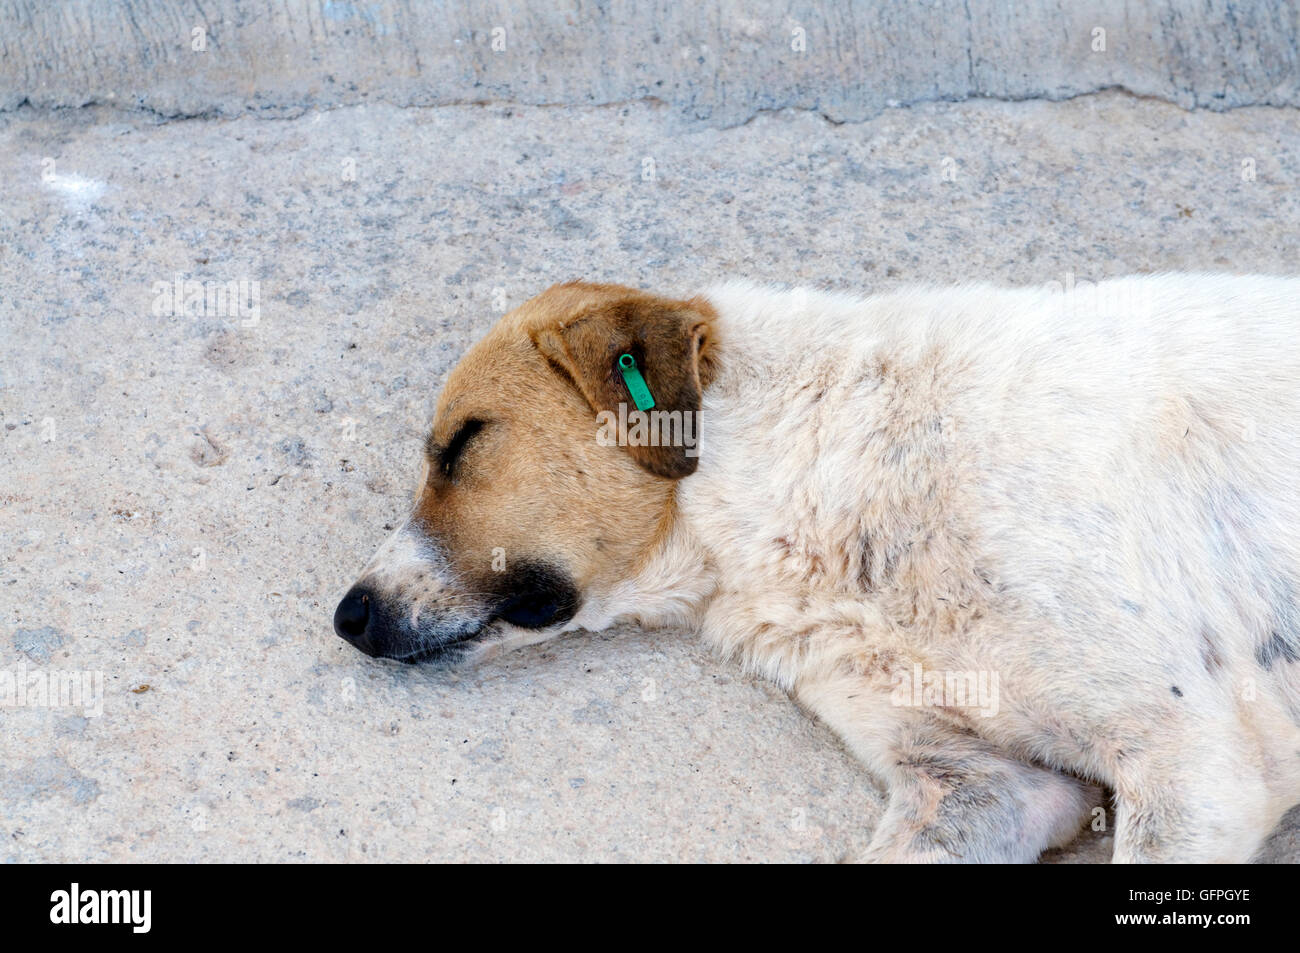 Street dog with KAPSA clip in its ear to show that it has been neutered and immunised, Kalkan, Turkey. Stock Photo